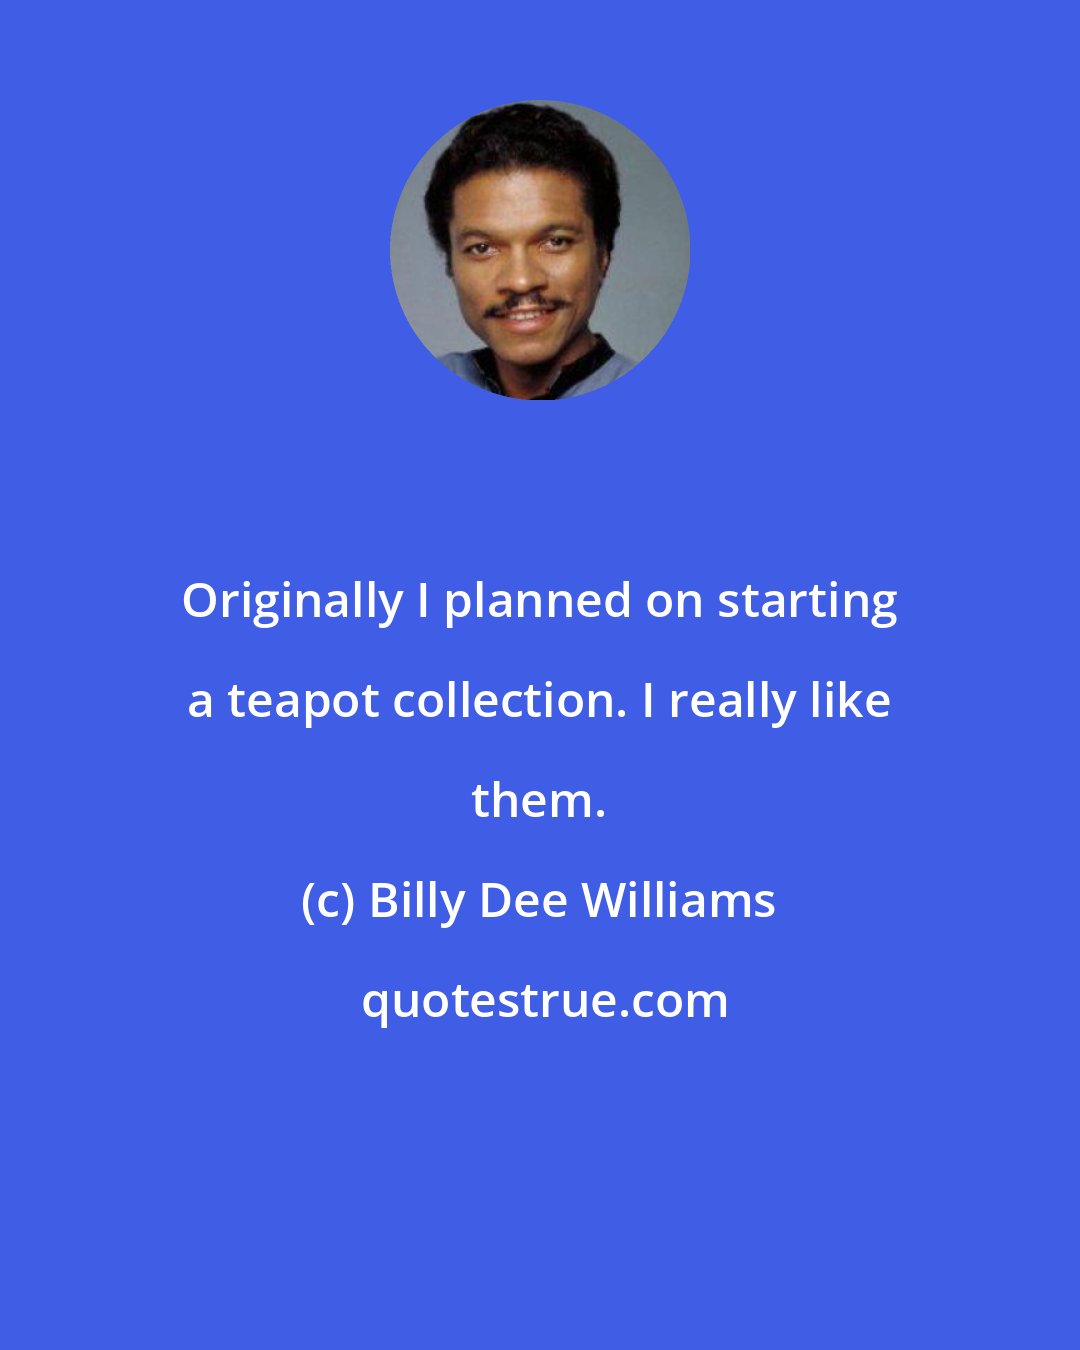 Billy Dee Williams: Originally I planned on starting a teapot collection. I really like them.